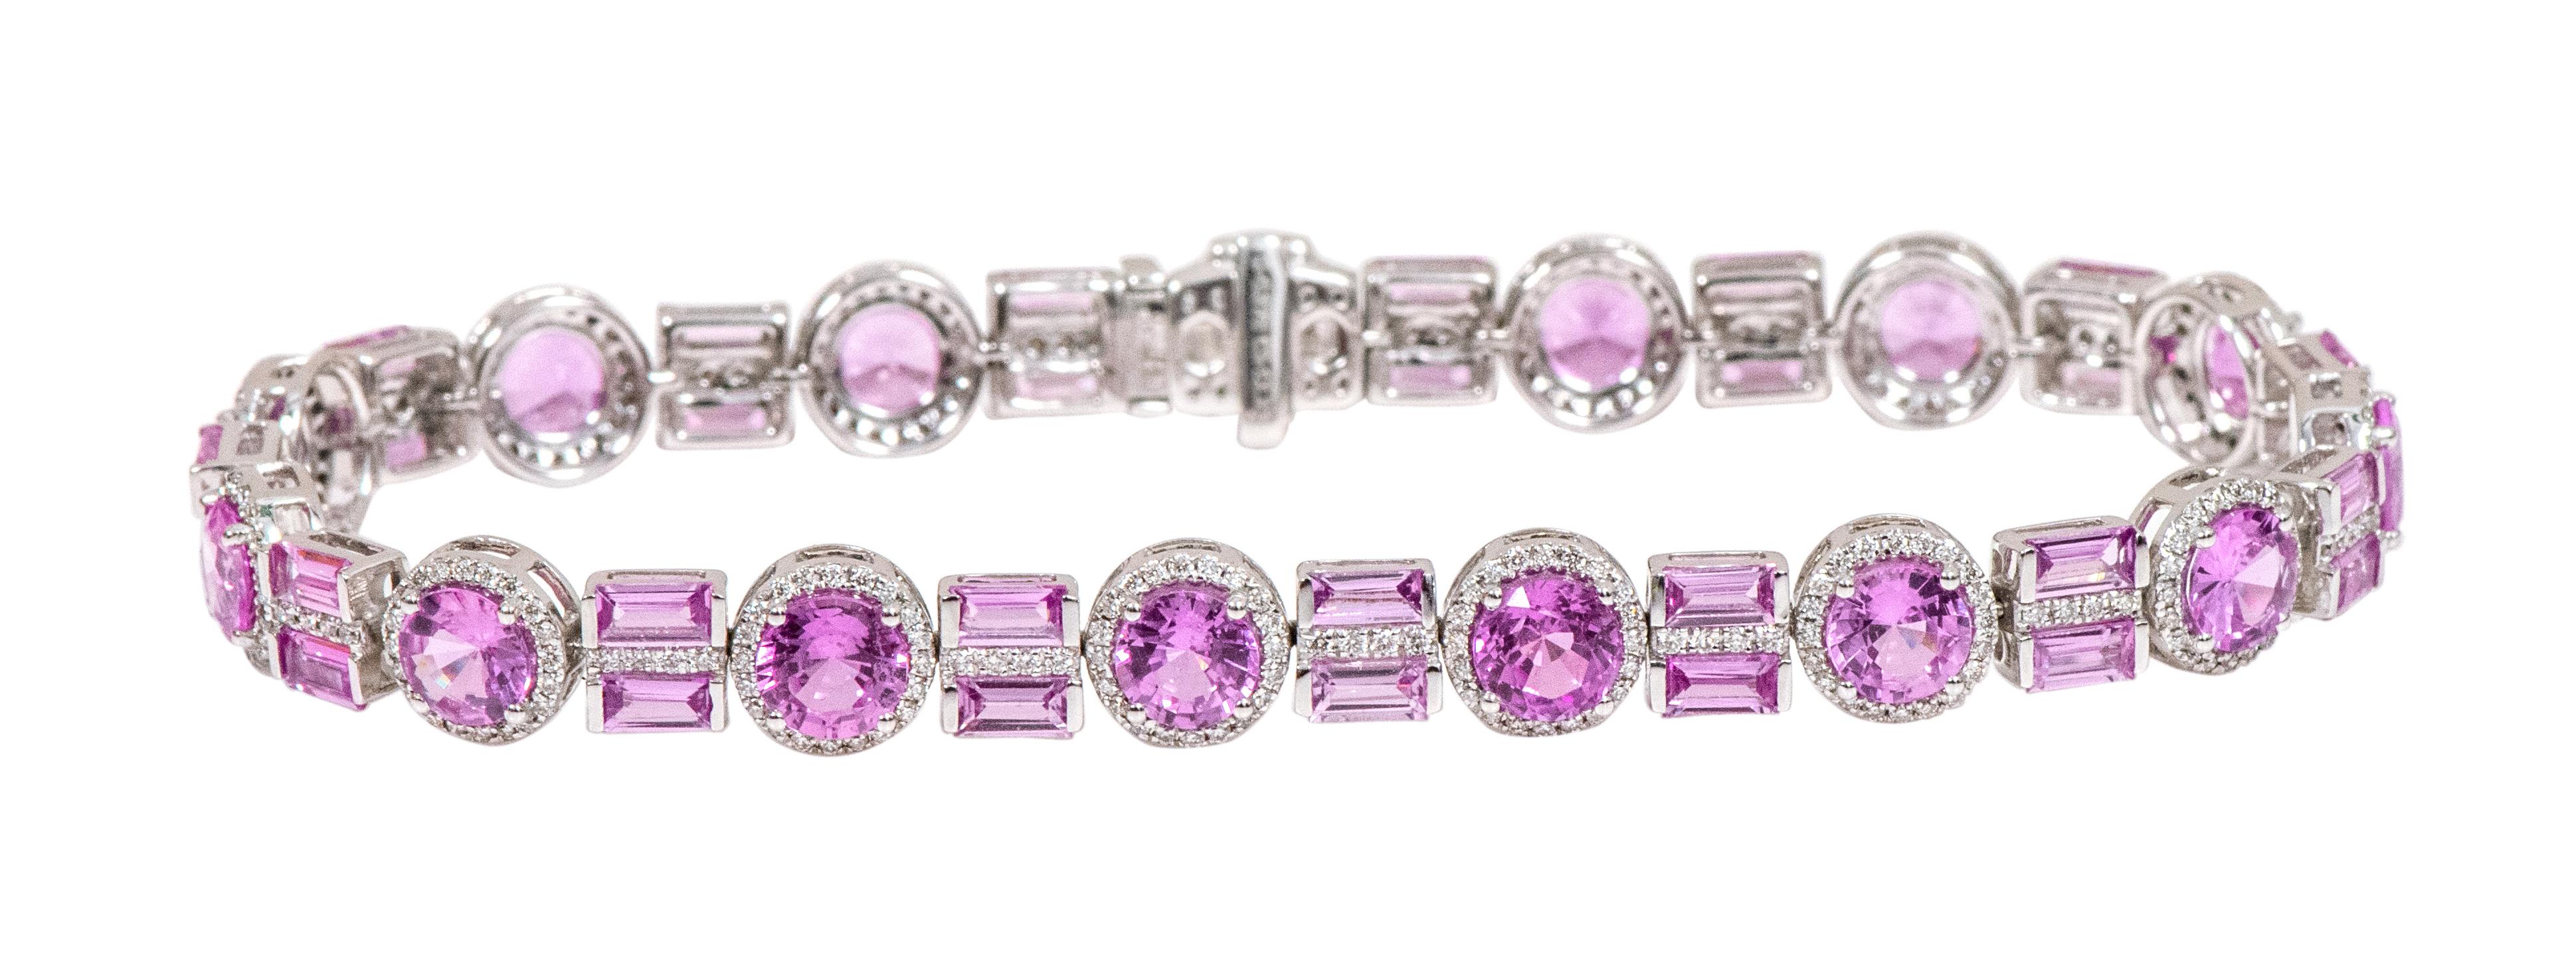 18 Karat White Gold 13.23 Carat Pink Sapphire and Diamond Tennis Bracelet

This incredible Fuschia pink sapphire and diamond tennis bracelet is impressive. The solitaire round brilliant cut pink sapphires are magnificently surrounded with a pave set